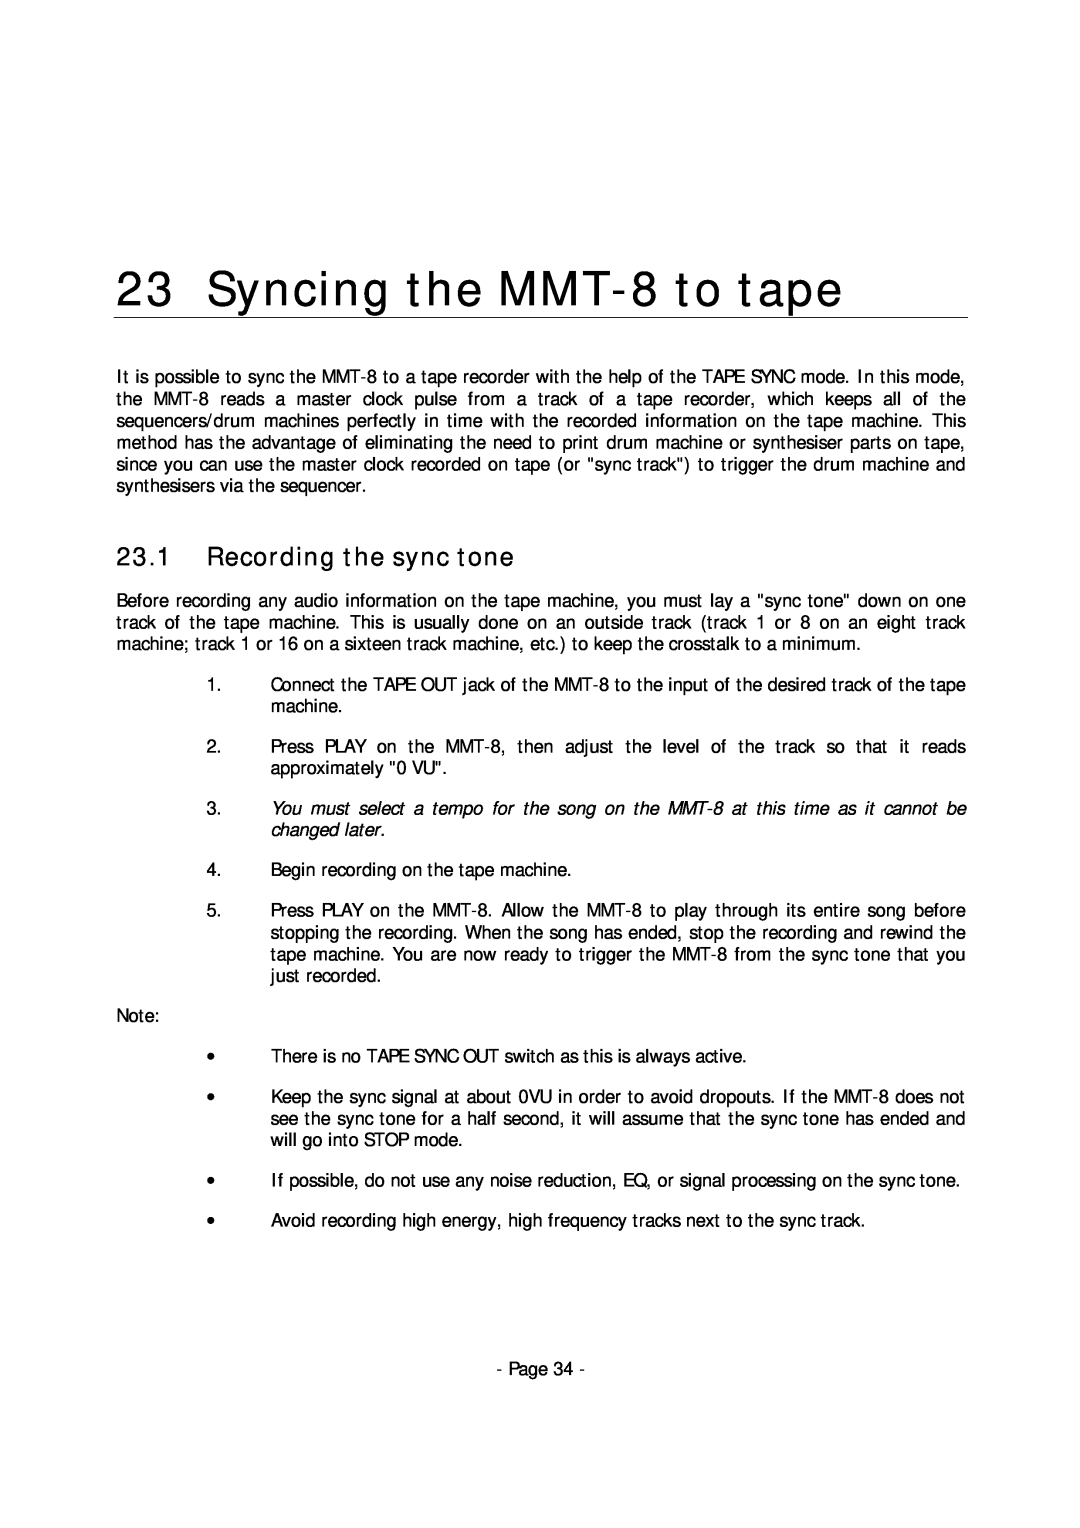 Alesis manual Syncing the MMT-8to tape, 23.1Recording the sync tone 